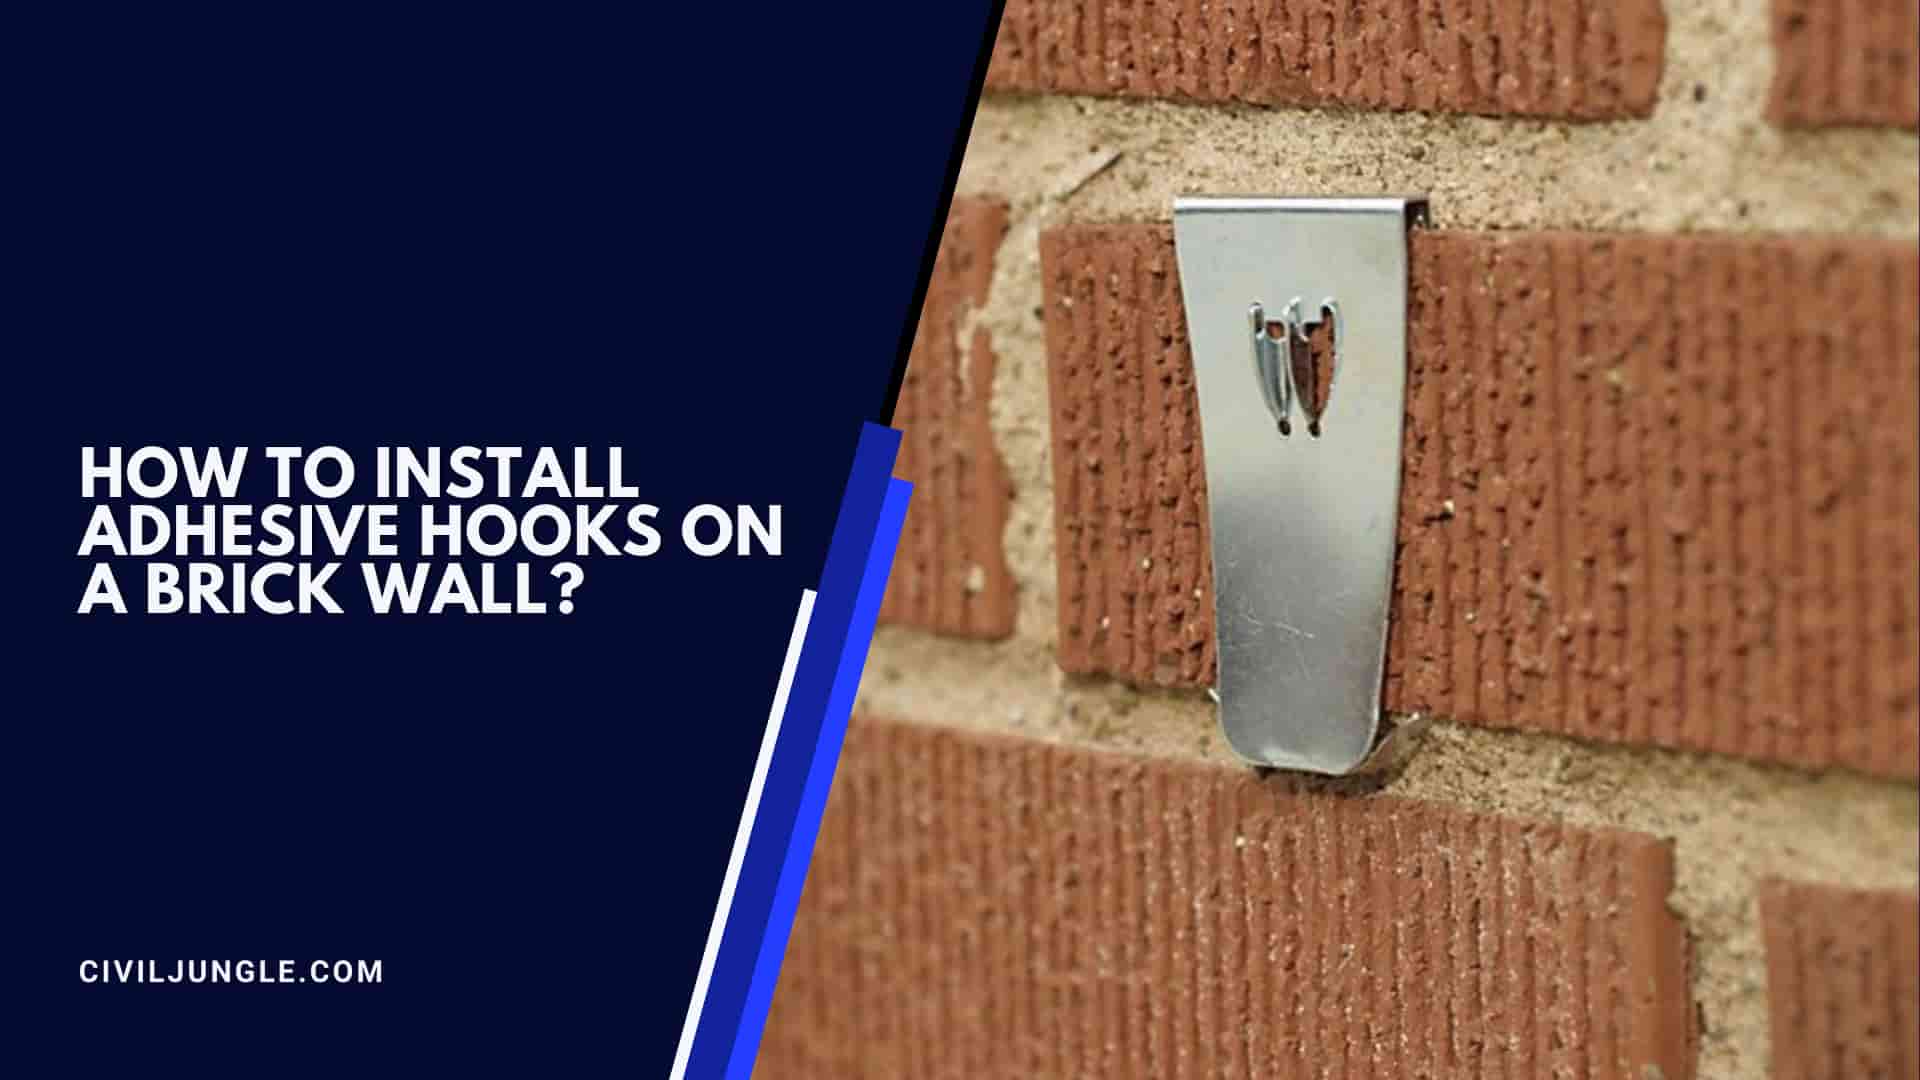 How to Install Adhesive Hooks on a Brick Wall?